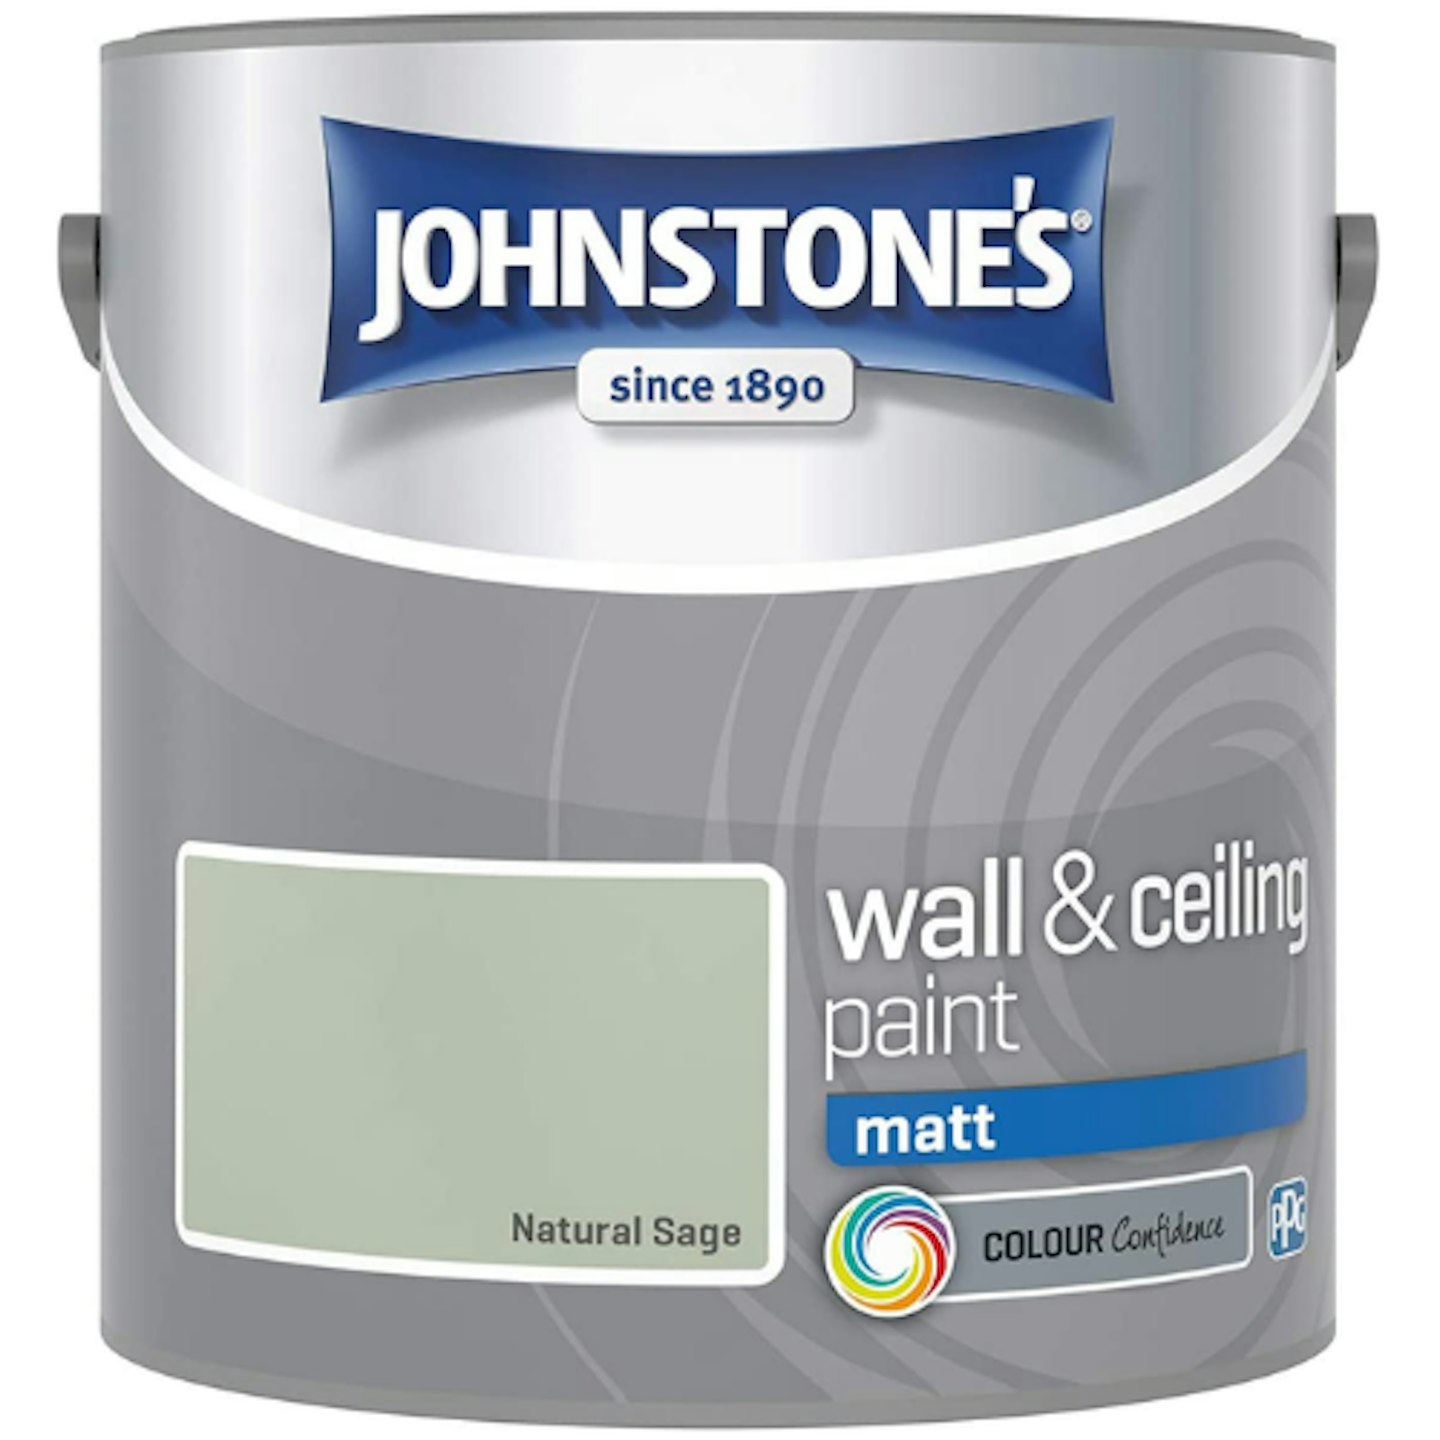 Johnstone's Natural Sage Wall and Ceiling Paint Matt, 2.5L